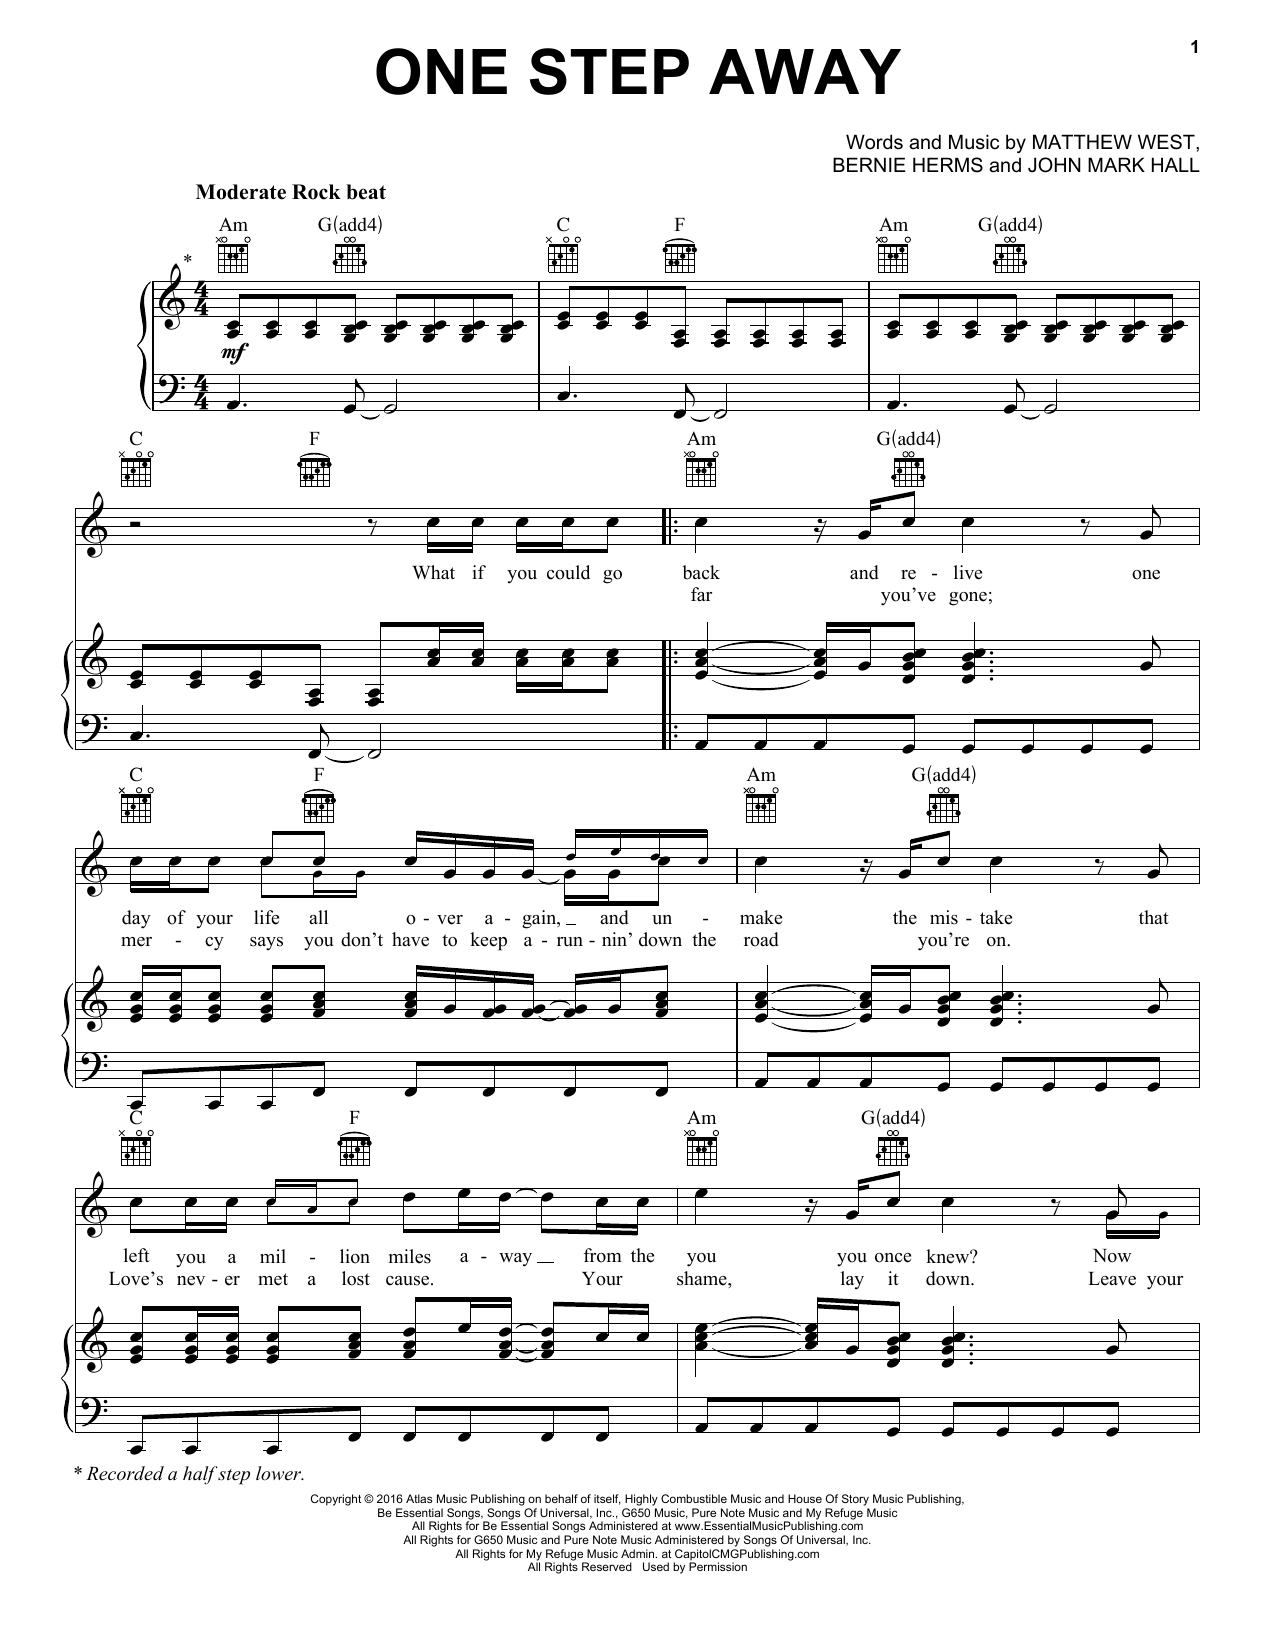 Download Casting Crowns One Step Away Sheet Music